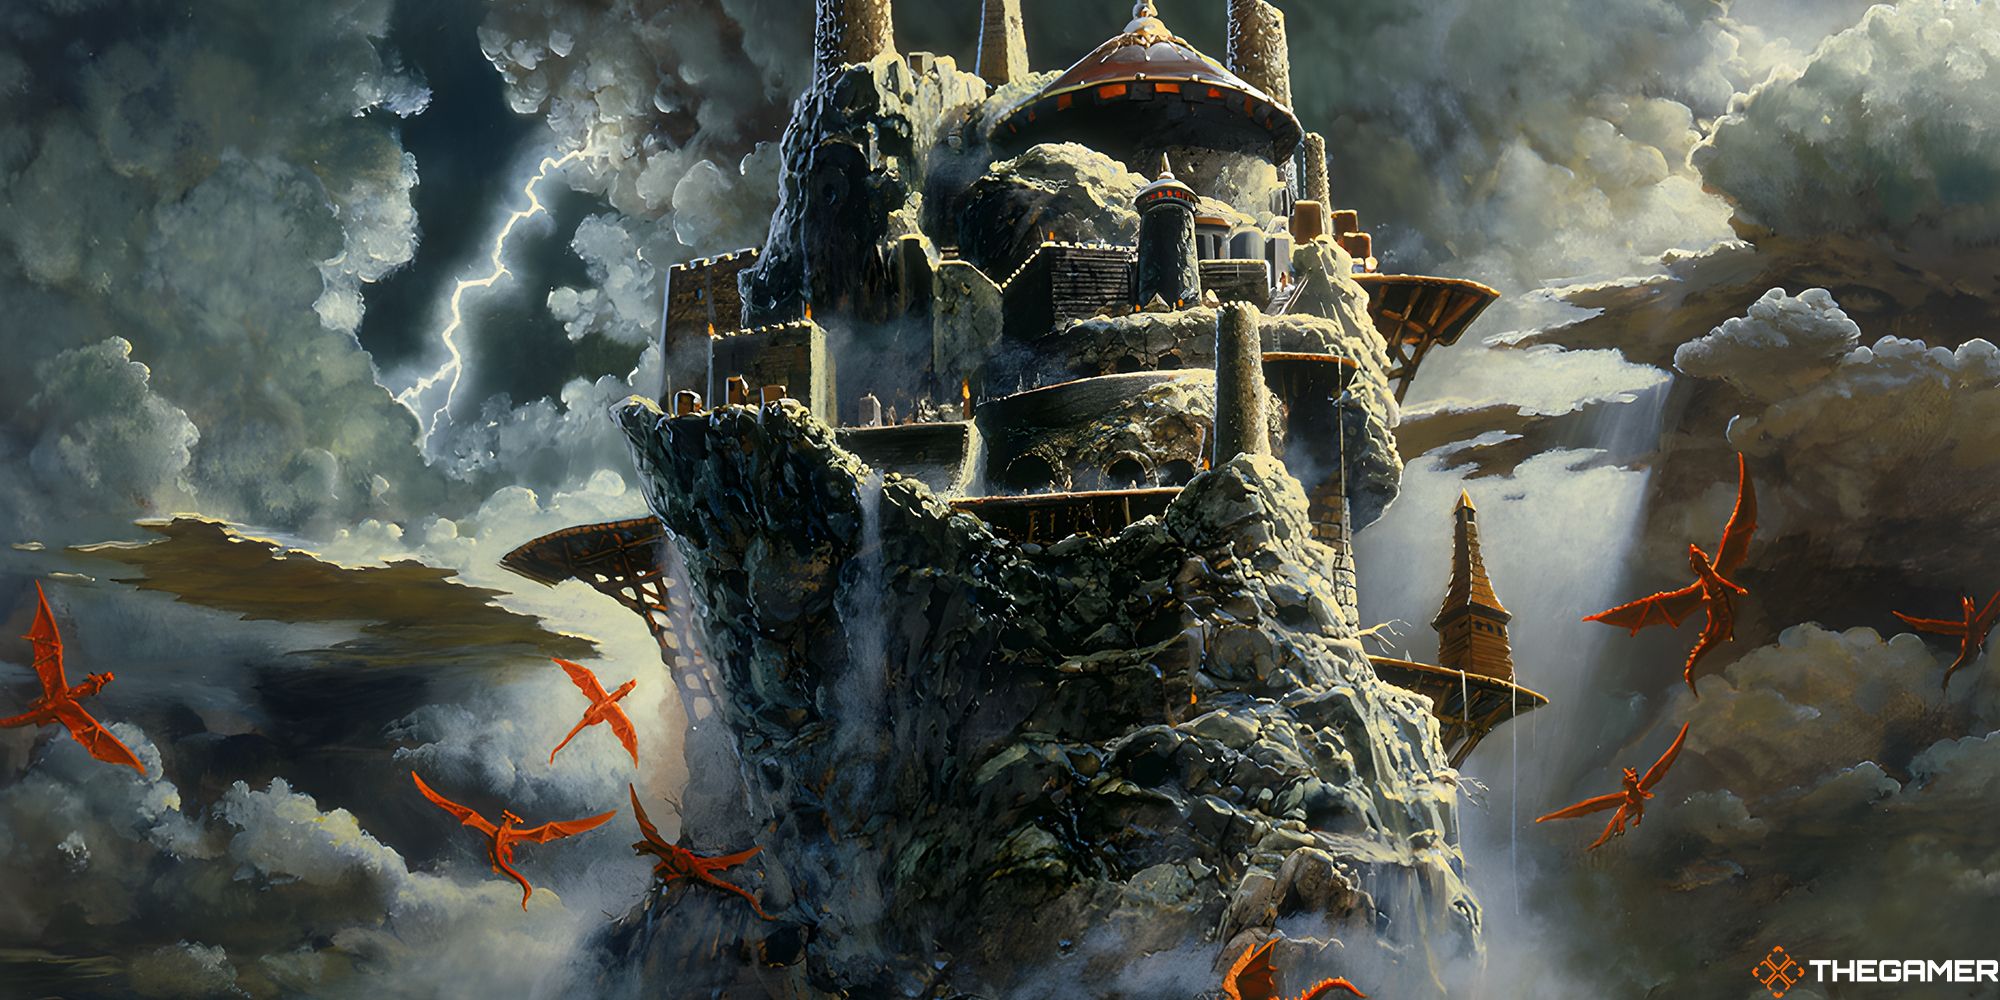 Flying Citadel by Keith Parkinson